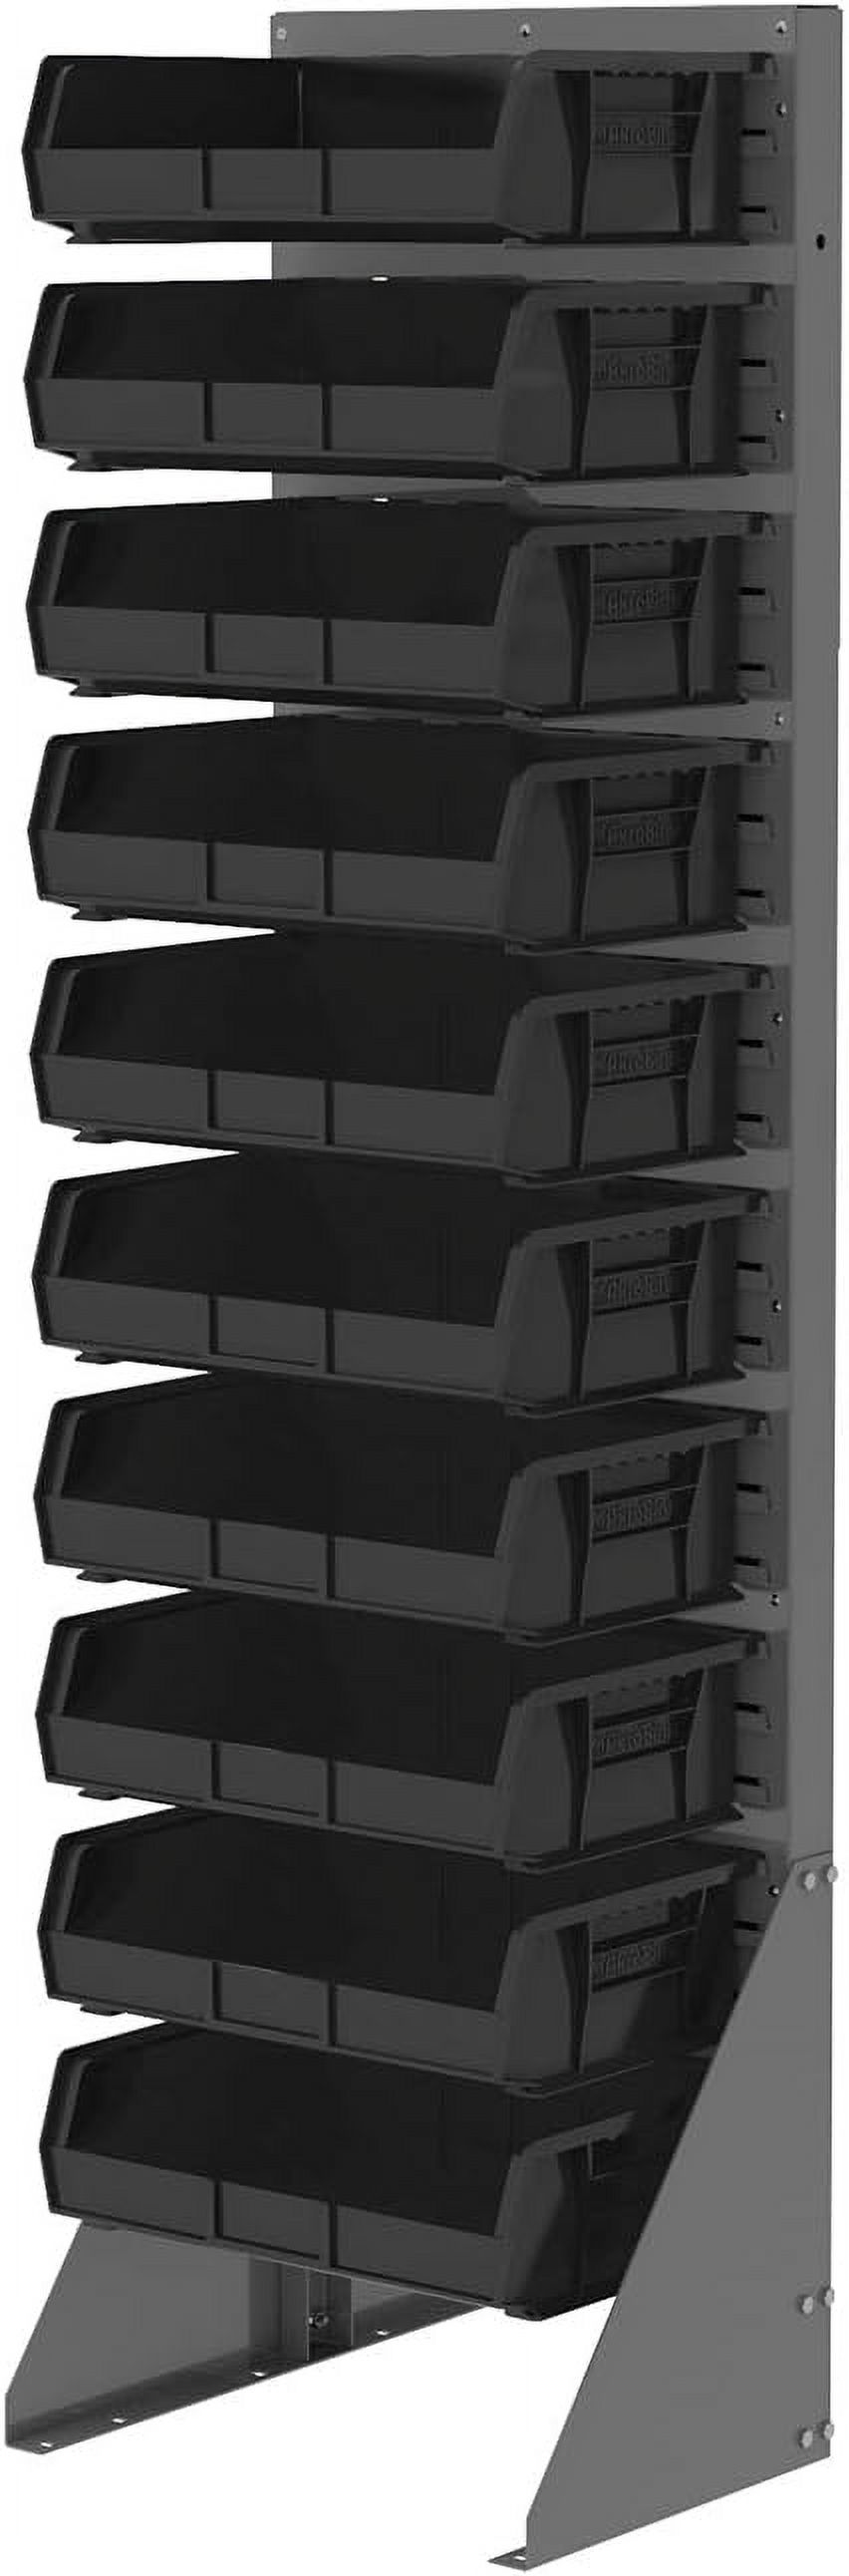 Akro-Mils 6 Pack of 10-7/8 x 16-1/2 x 5" Black AkroBins Plastic Storage Bin Hanging Stacking Containers # 30255BLACK - image 3 of 8